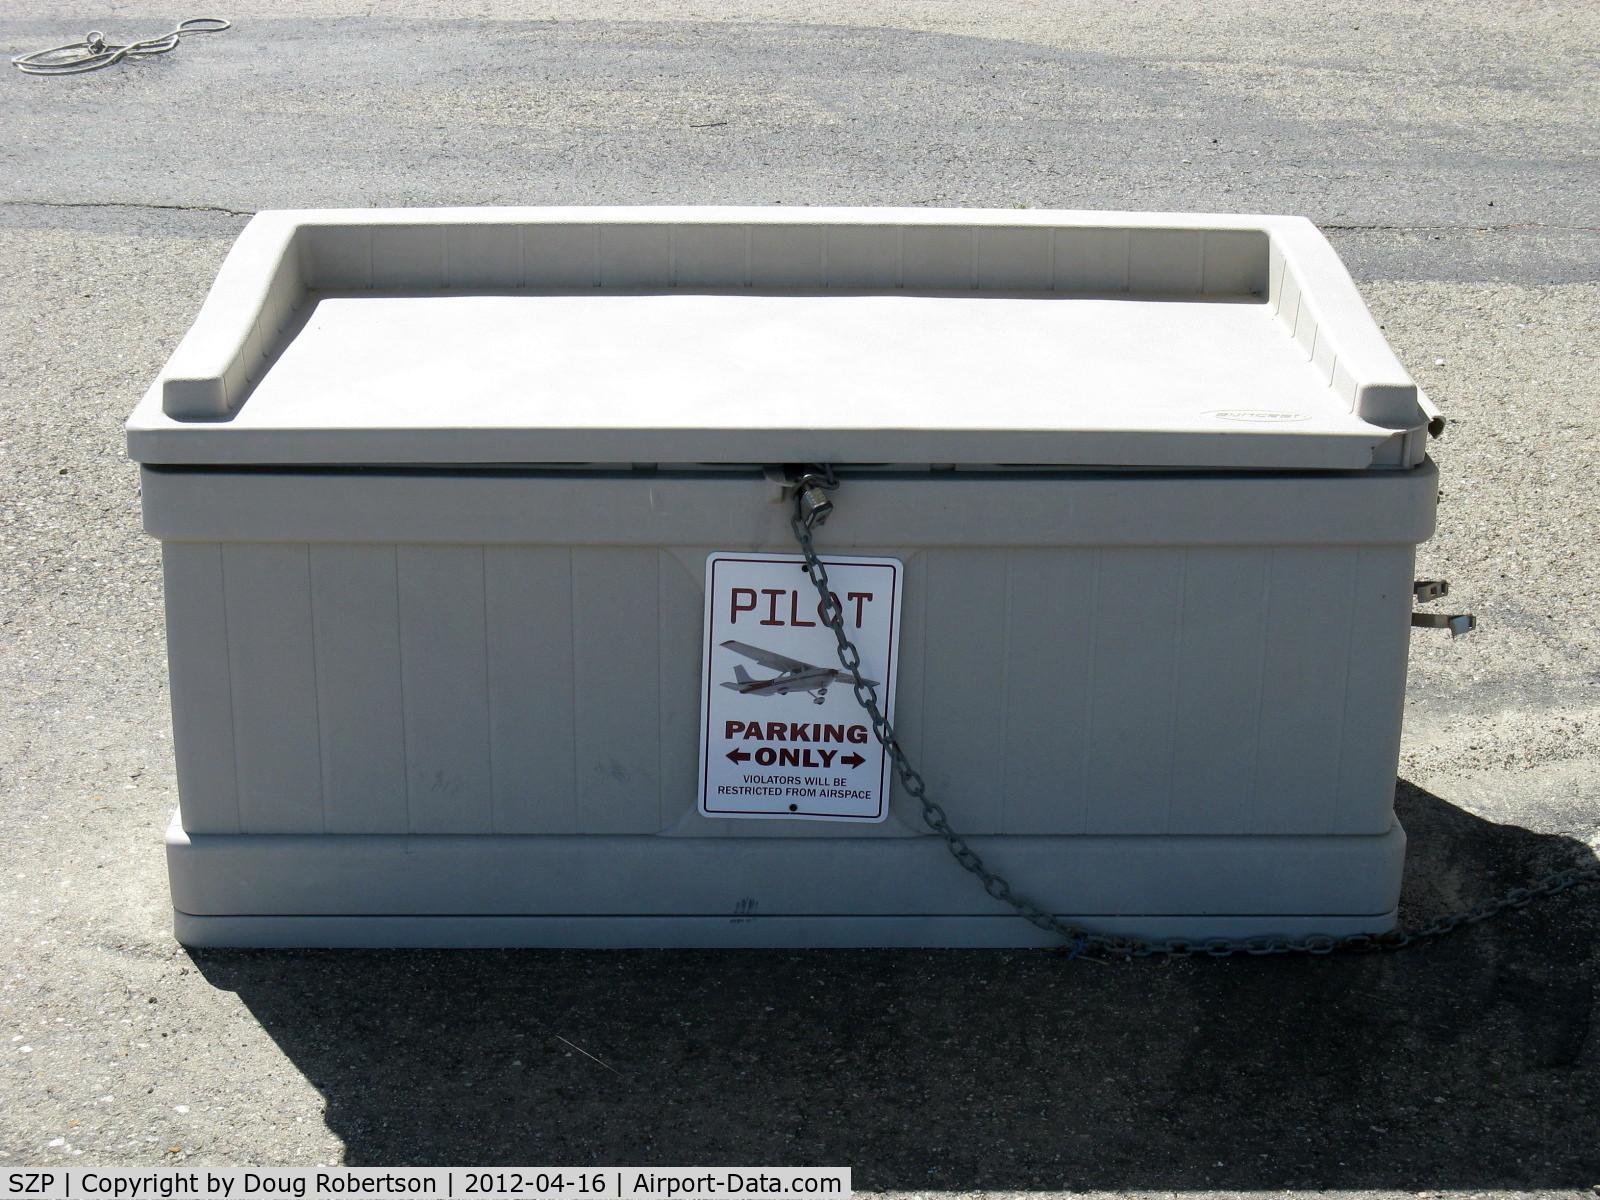 Santa Paula Airport (SZP) - Typical aircraft owner minor maintenance lockbox in assigned tiedowns area-with atypical message